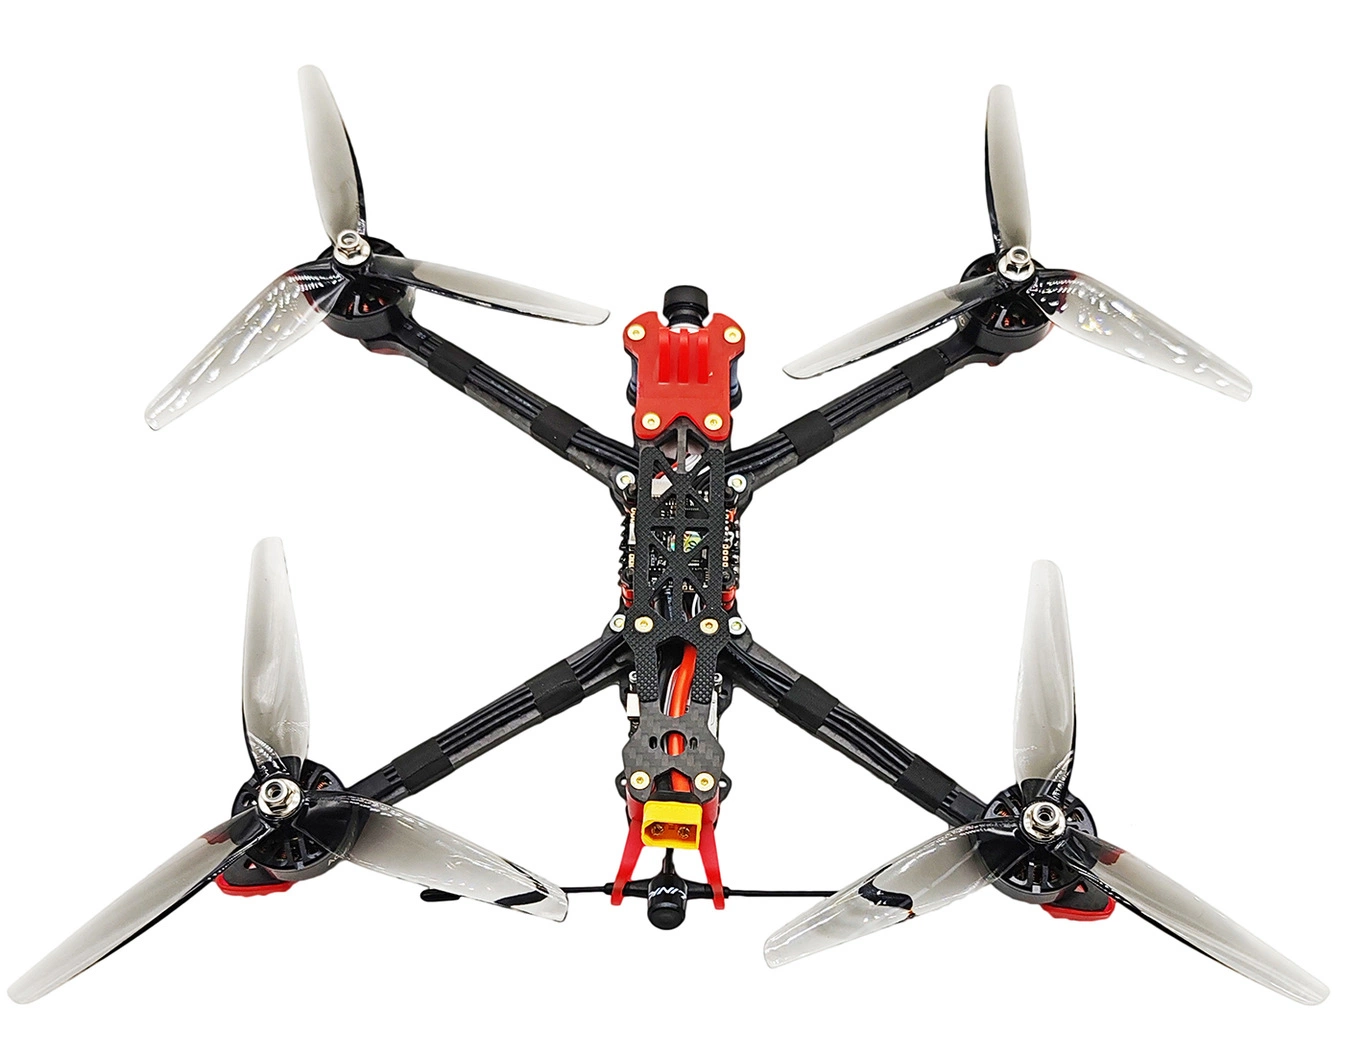 7 Inch Quadcopter Analog Digital HD Aerial Photography Four-Axis Frame Traversal Racing Drone Fpv